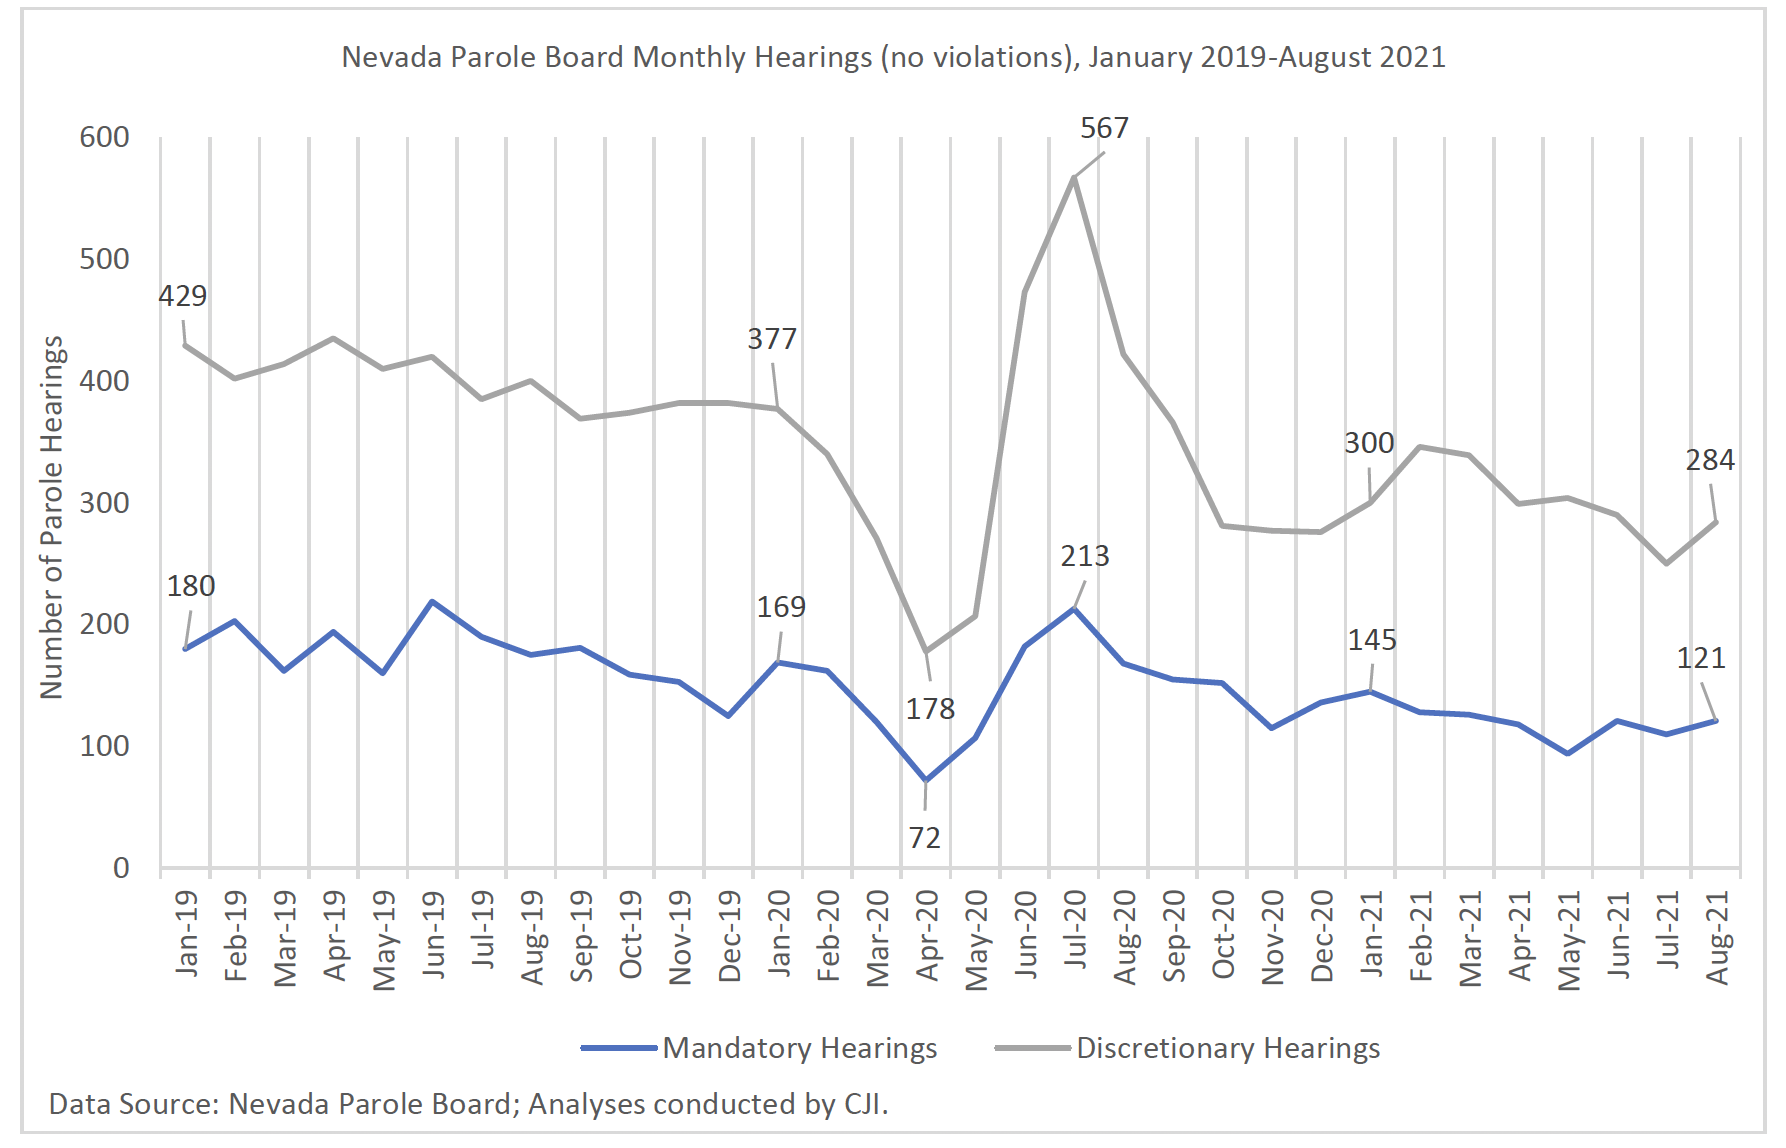 A view of dramatic fluctuations in parole hearings netted a 16 percent decline from March to December 2020 